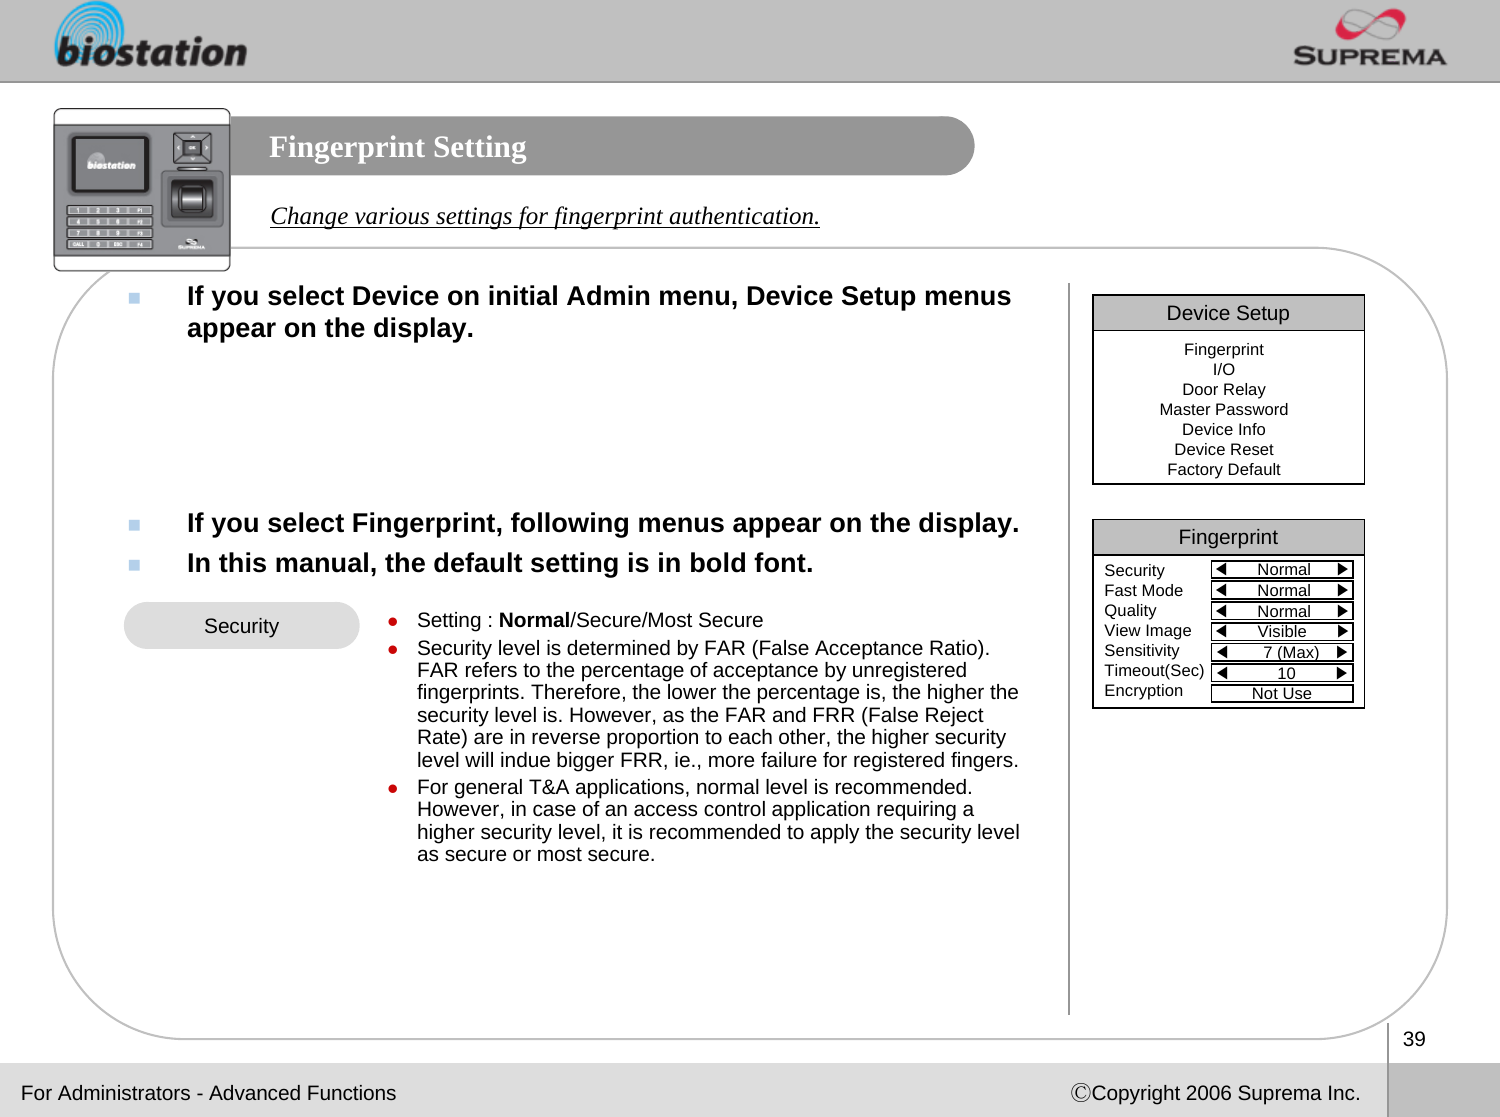 39ⒸCopyright 2006 Suprema Inc.Fingerprint SettingIf you select Device on initial Admin menu, Device Setup menus appear on the display.If you select Fingerprint, following menus appear on the display.In this manual, the default setting is in bold font.Change various settings for fingerprint authentication.zSetting : Normal/Secure/Most SecurezSecurity level is determined by FAR (False Acceptance Ratio). FAR refers to the percentage of acceptance by unregistered fingerprints. Therefore, the lower the percentage is, the higher the security level is. However, as the FAR and FRR (False Reject Rate) are in reverse proportion to each other, the higher security level will indue bigger FRR, ie., more failure for registered fingers. zFor general T&amp;A applications, normal level is recommended. However, in case of an access control application requiring a higher security level, it is recommended to apply the security level as secure or most secure. SecurityDevice SetupFingerprintI/ODoor RelayMaster PasswordDevice InfoDevice ResetFactory DefaultFor Administrators - Advanced FunctionsFingerprint◀Normal     ▶SecurityFast ModeQualityView ImageSensitivityTimeout(Sec)Encryption◀Normal     ▶◀Normal     ▶◀Visible      ▶◀7 (Max)   ▶◀10        ▶Not Use